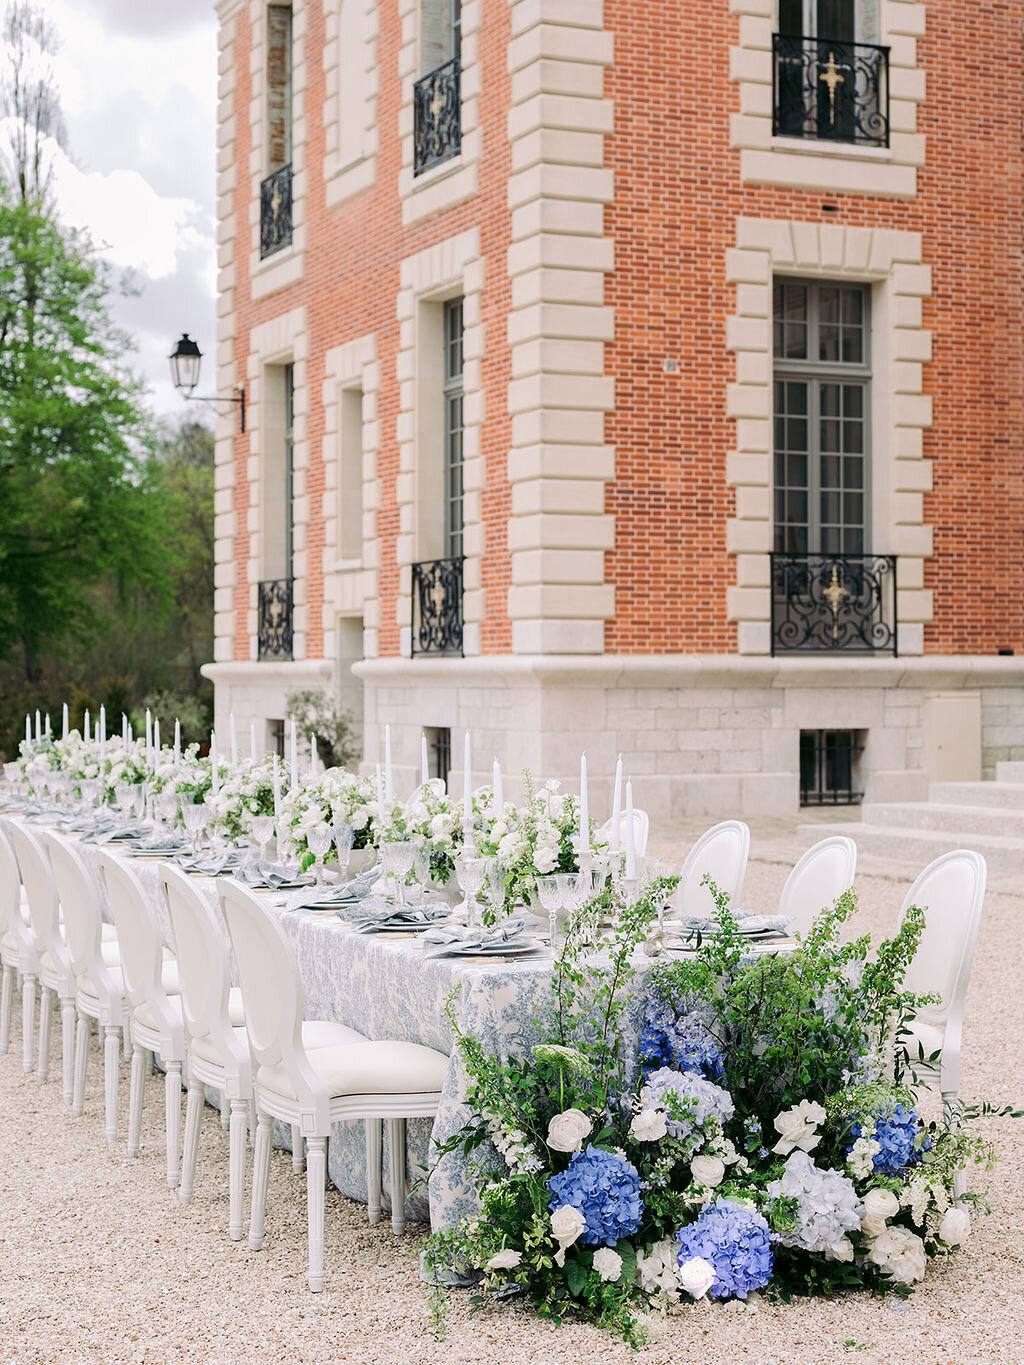 Wedding Tablescape in different shades of blue